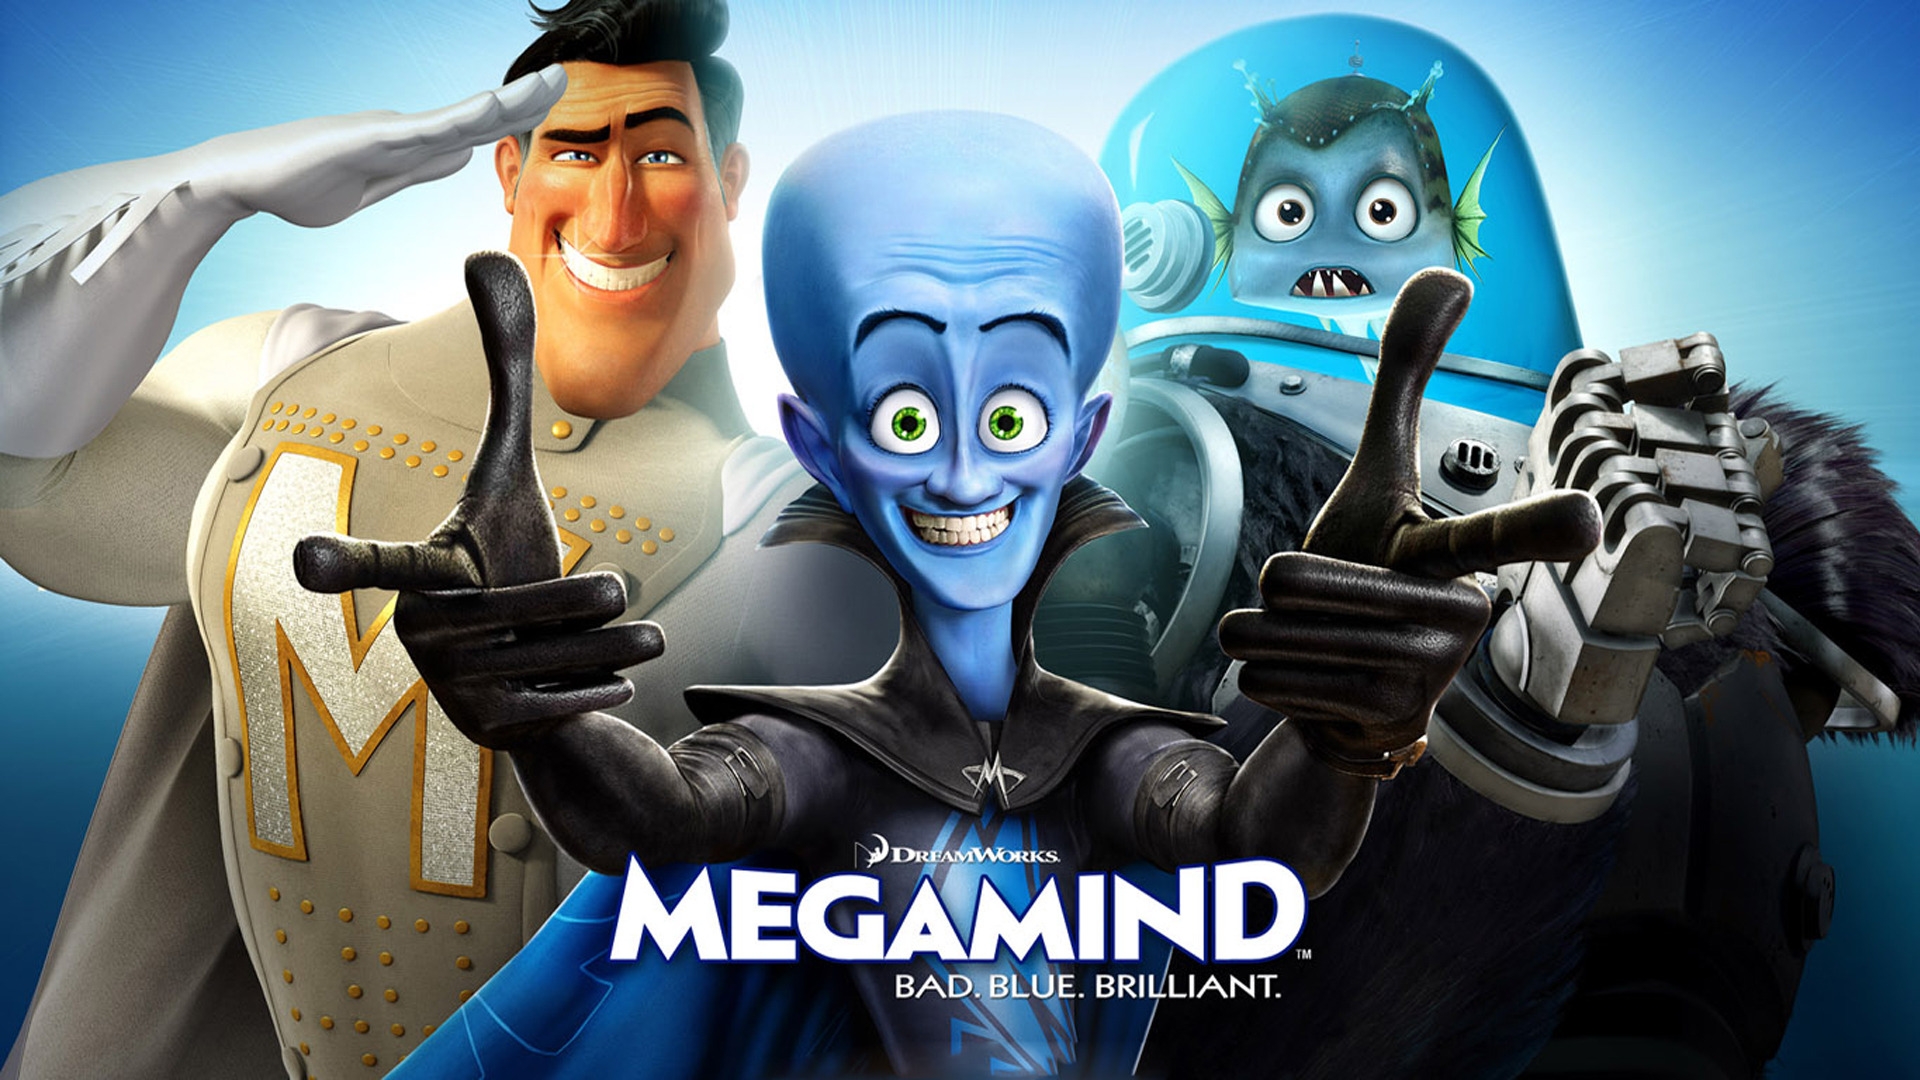 Megamind Characters for 1920 x 1080 HDTV 1080p resolution